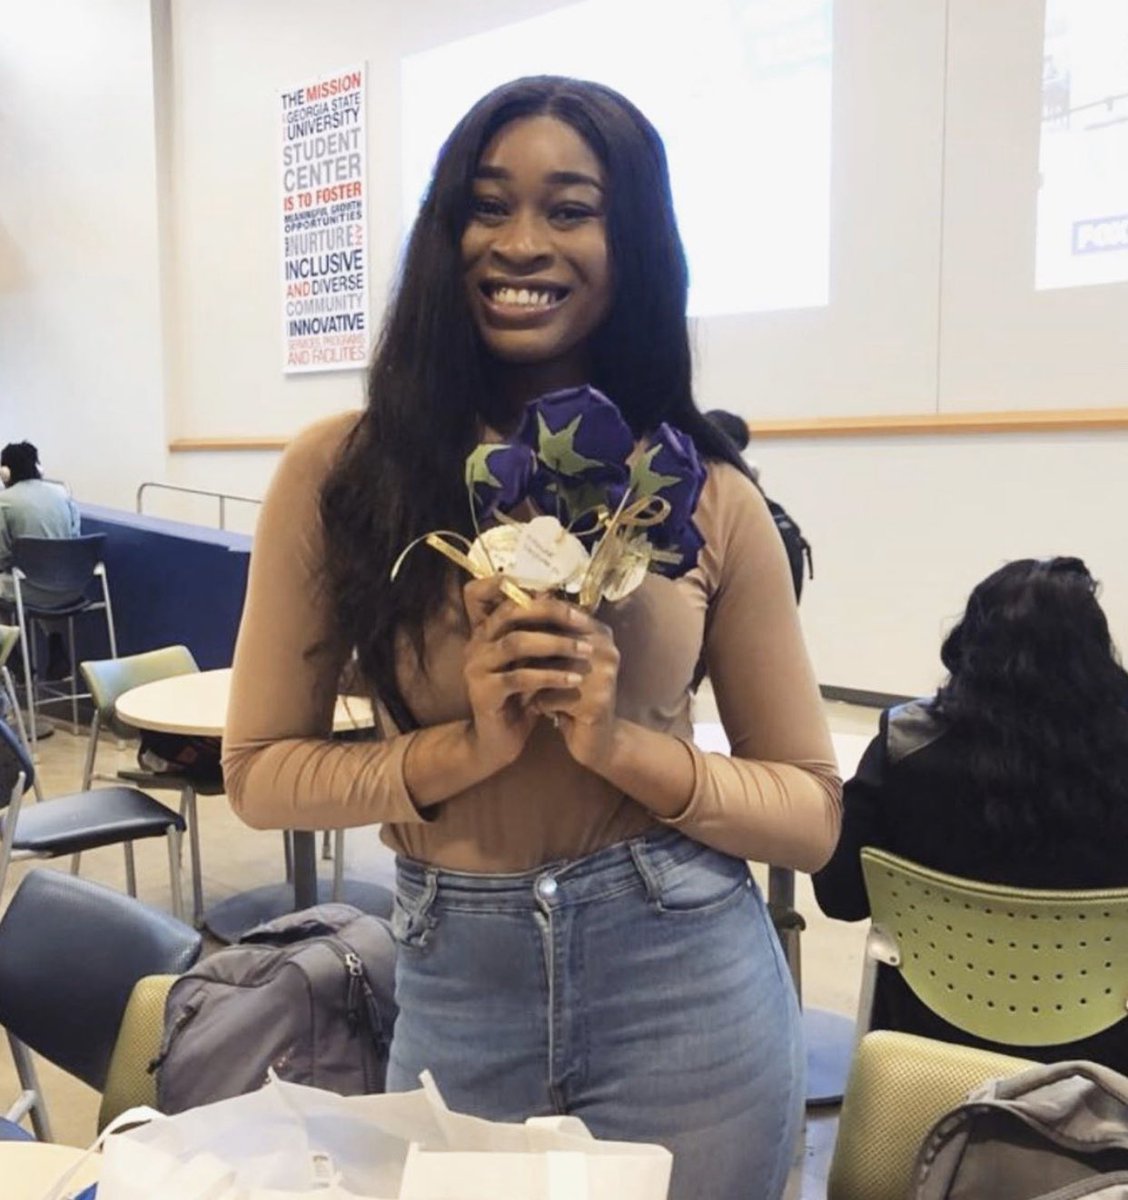 Love’s Promise had an amazing time giving out flowers to some amazing students on campus! Enjoy your Valentine’s Day loves! 💜 
#loveshouldnthurt #healthyrelationships #domesticviolenceawareness #selflove #valentinesday2020